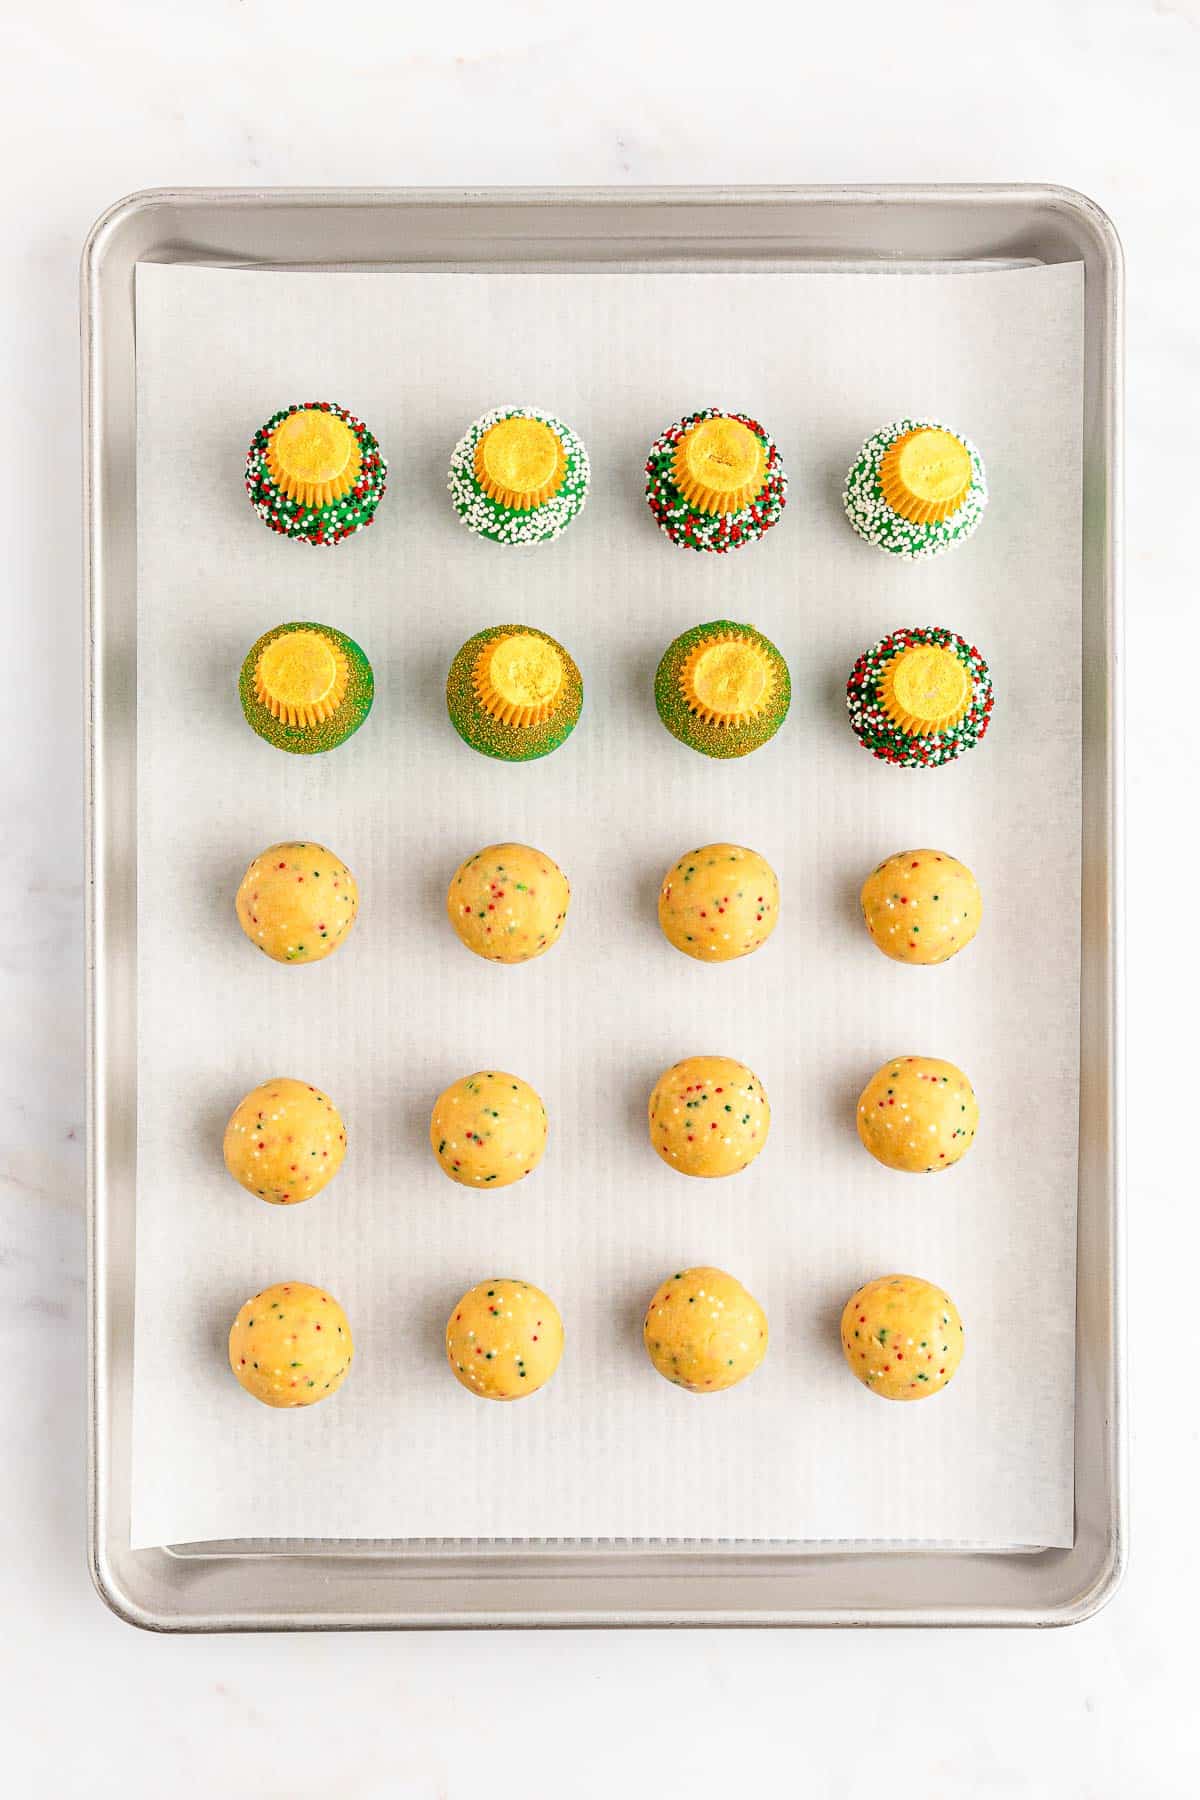 A baking sheet with golden oreo balls with some dipped in green candy. cupcakes on it.